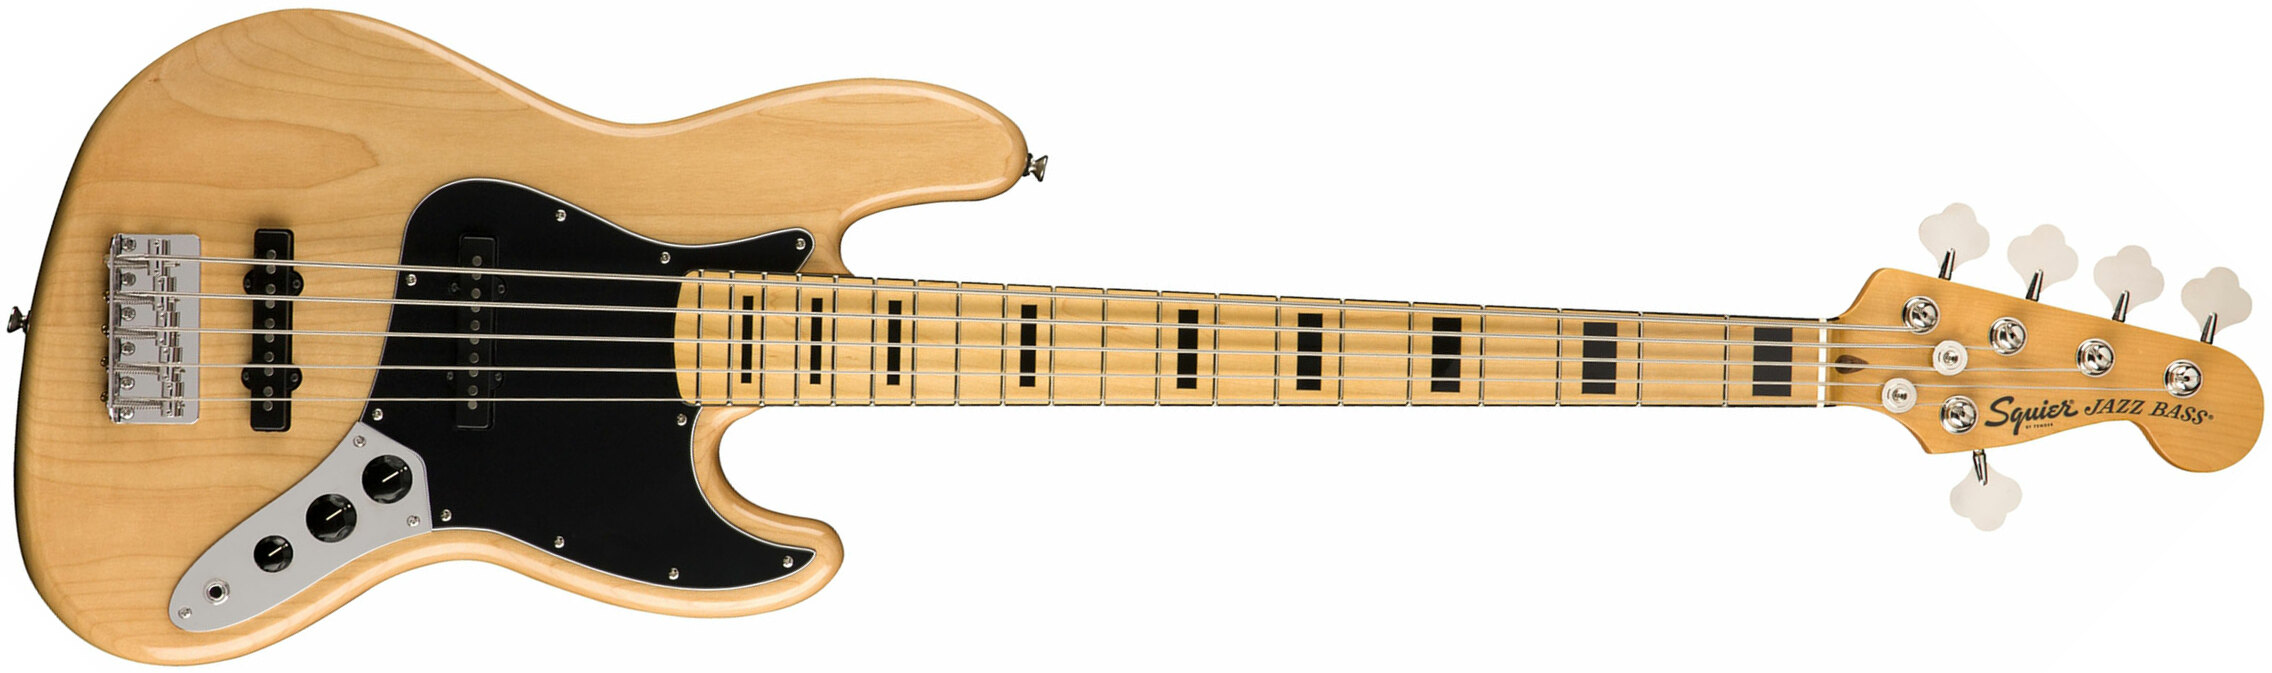 Squier Jazz Bass Classic Vibe 70s 2019 Mn - Natural - Solid body elektrische bas - Main picture